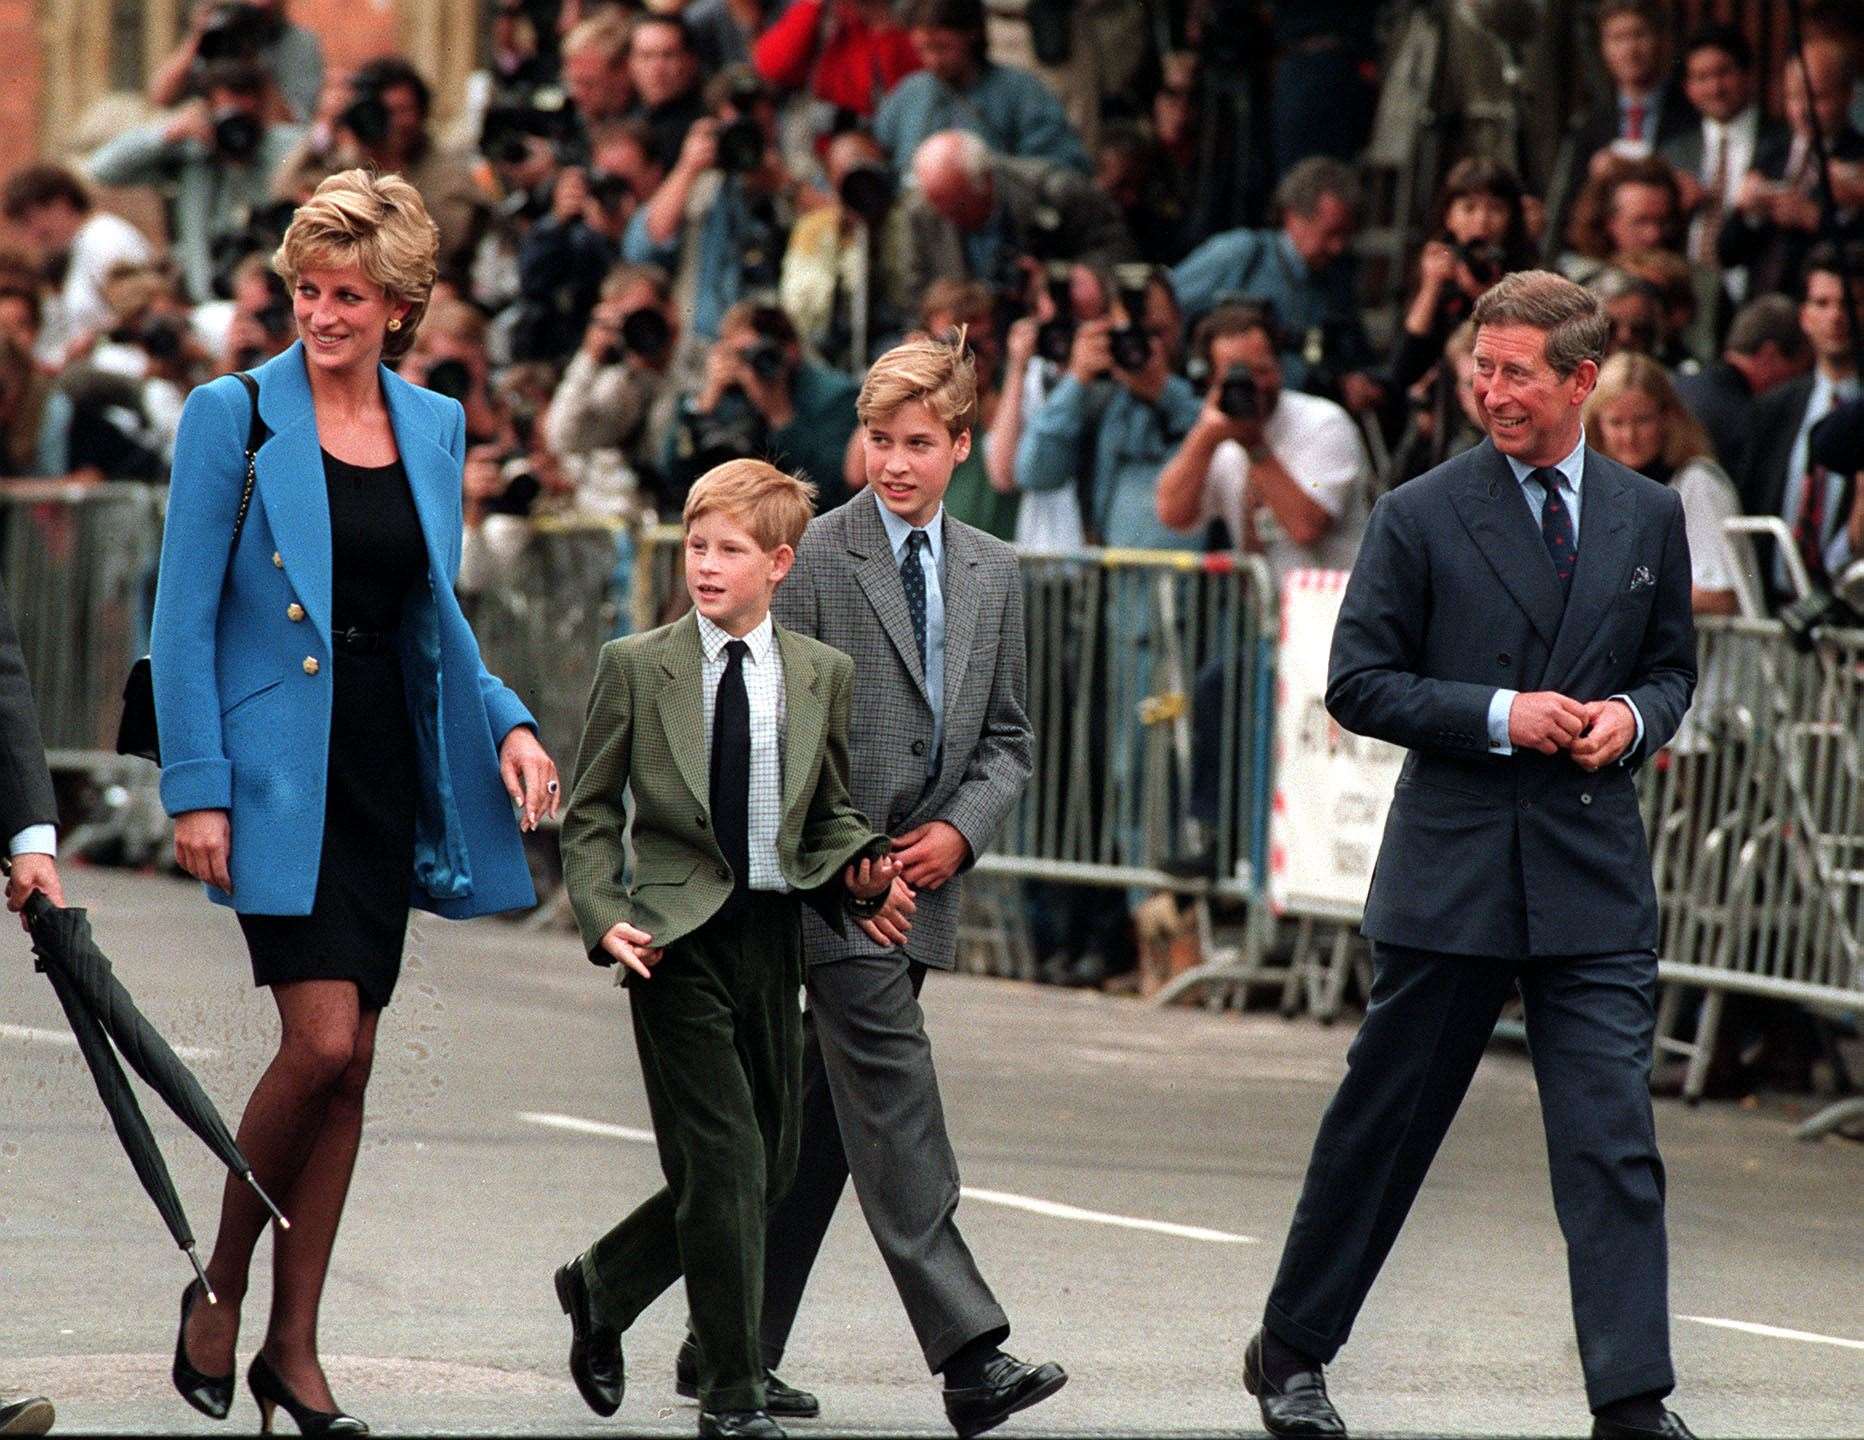 The Prince and Princess of Wales and their sons William and Harry on William’s first day at Eton (PA Archive/PA Images)